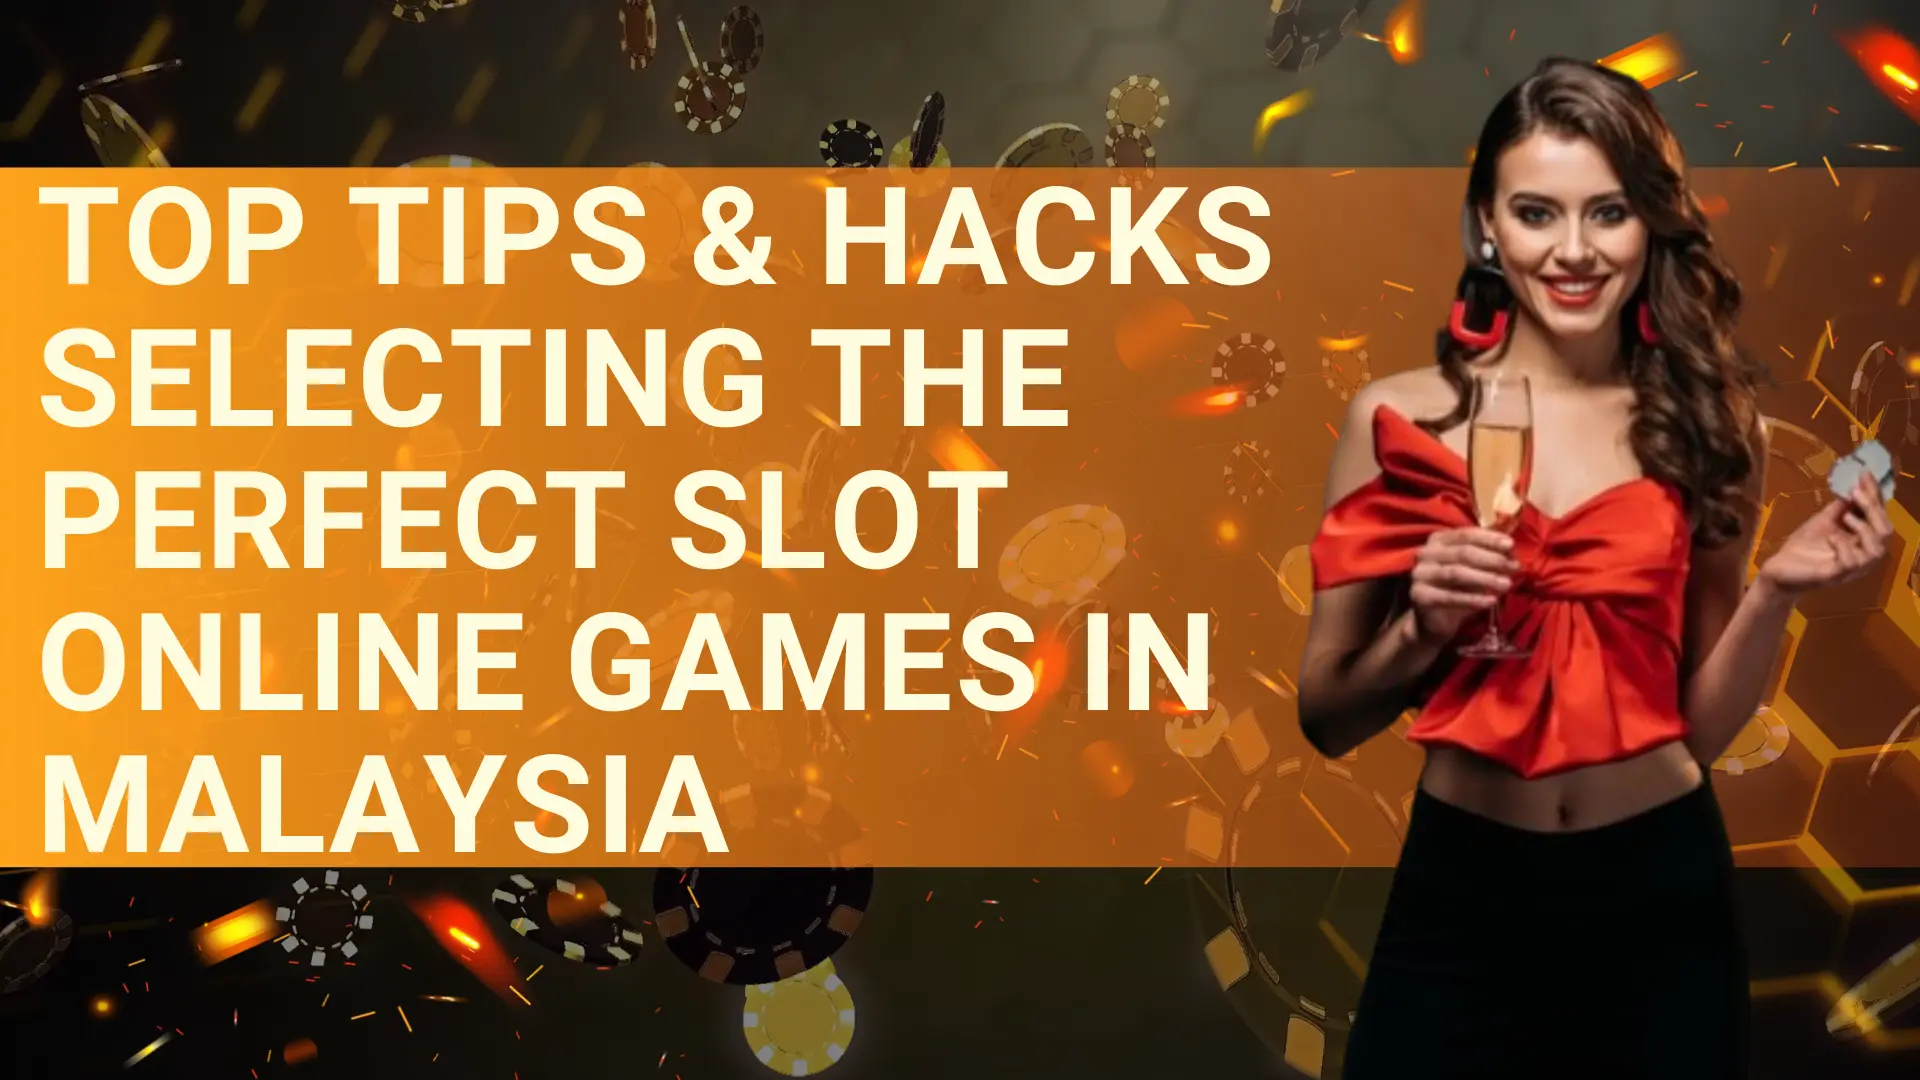 Top Tips & Hacks Selecting the Perfect Slot Online Games in Malaysia